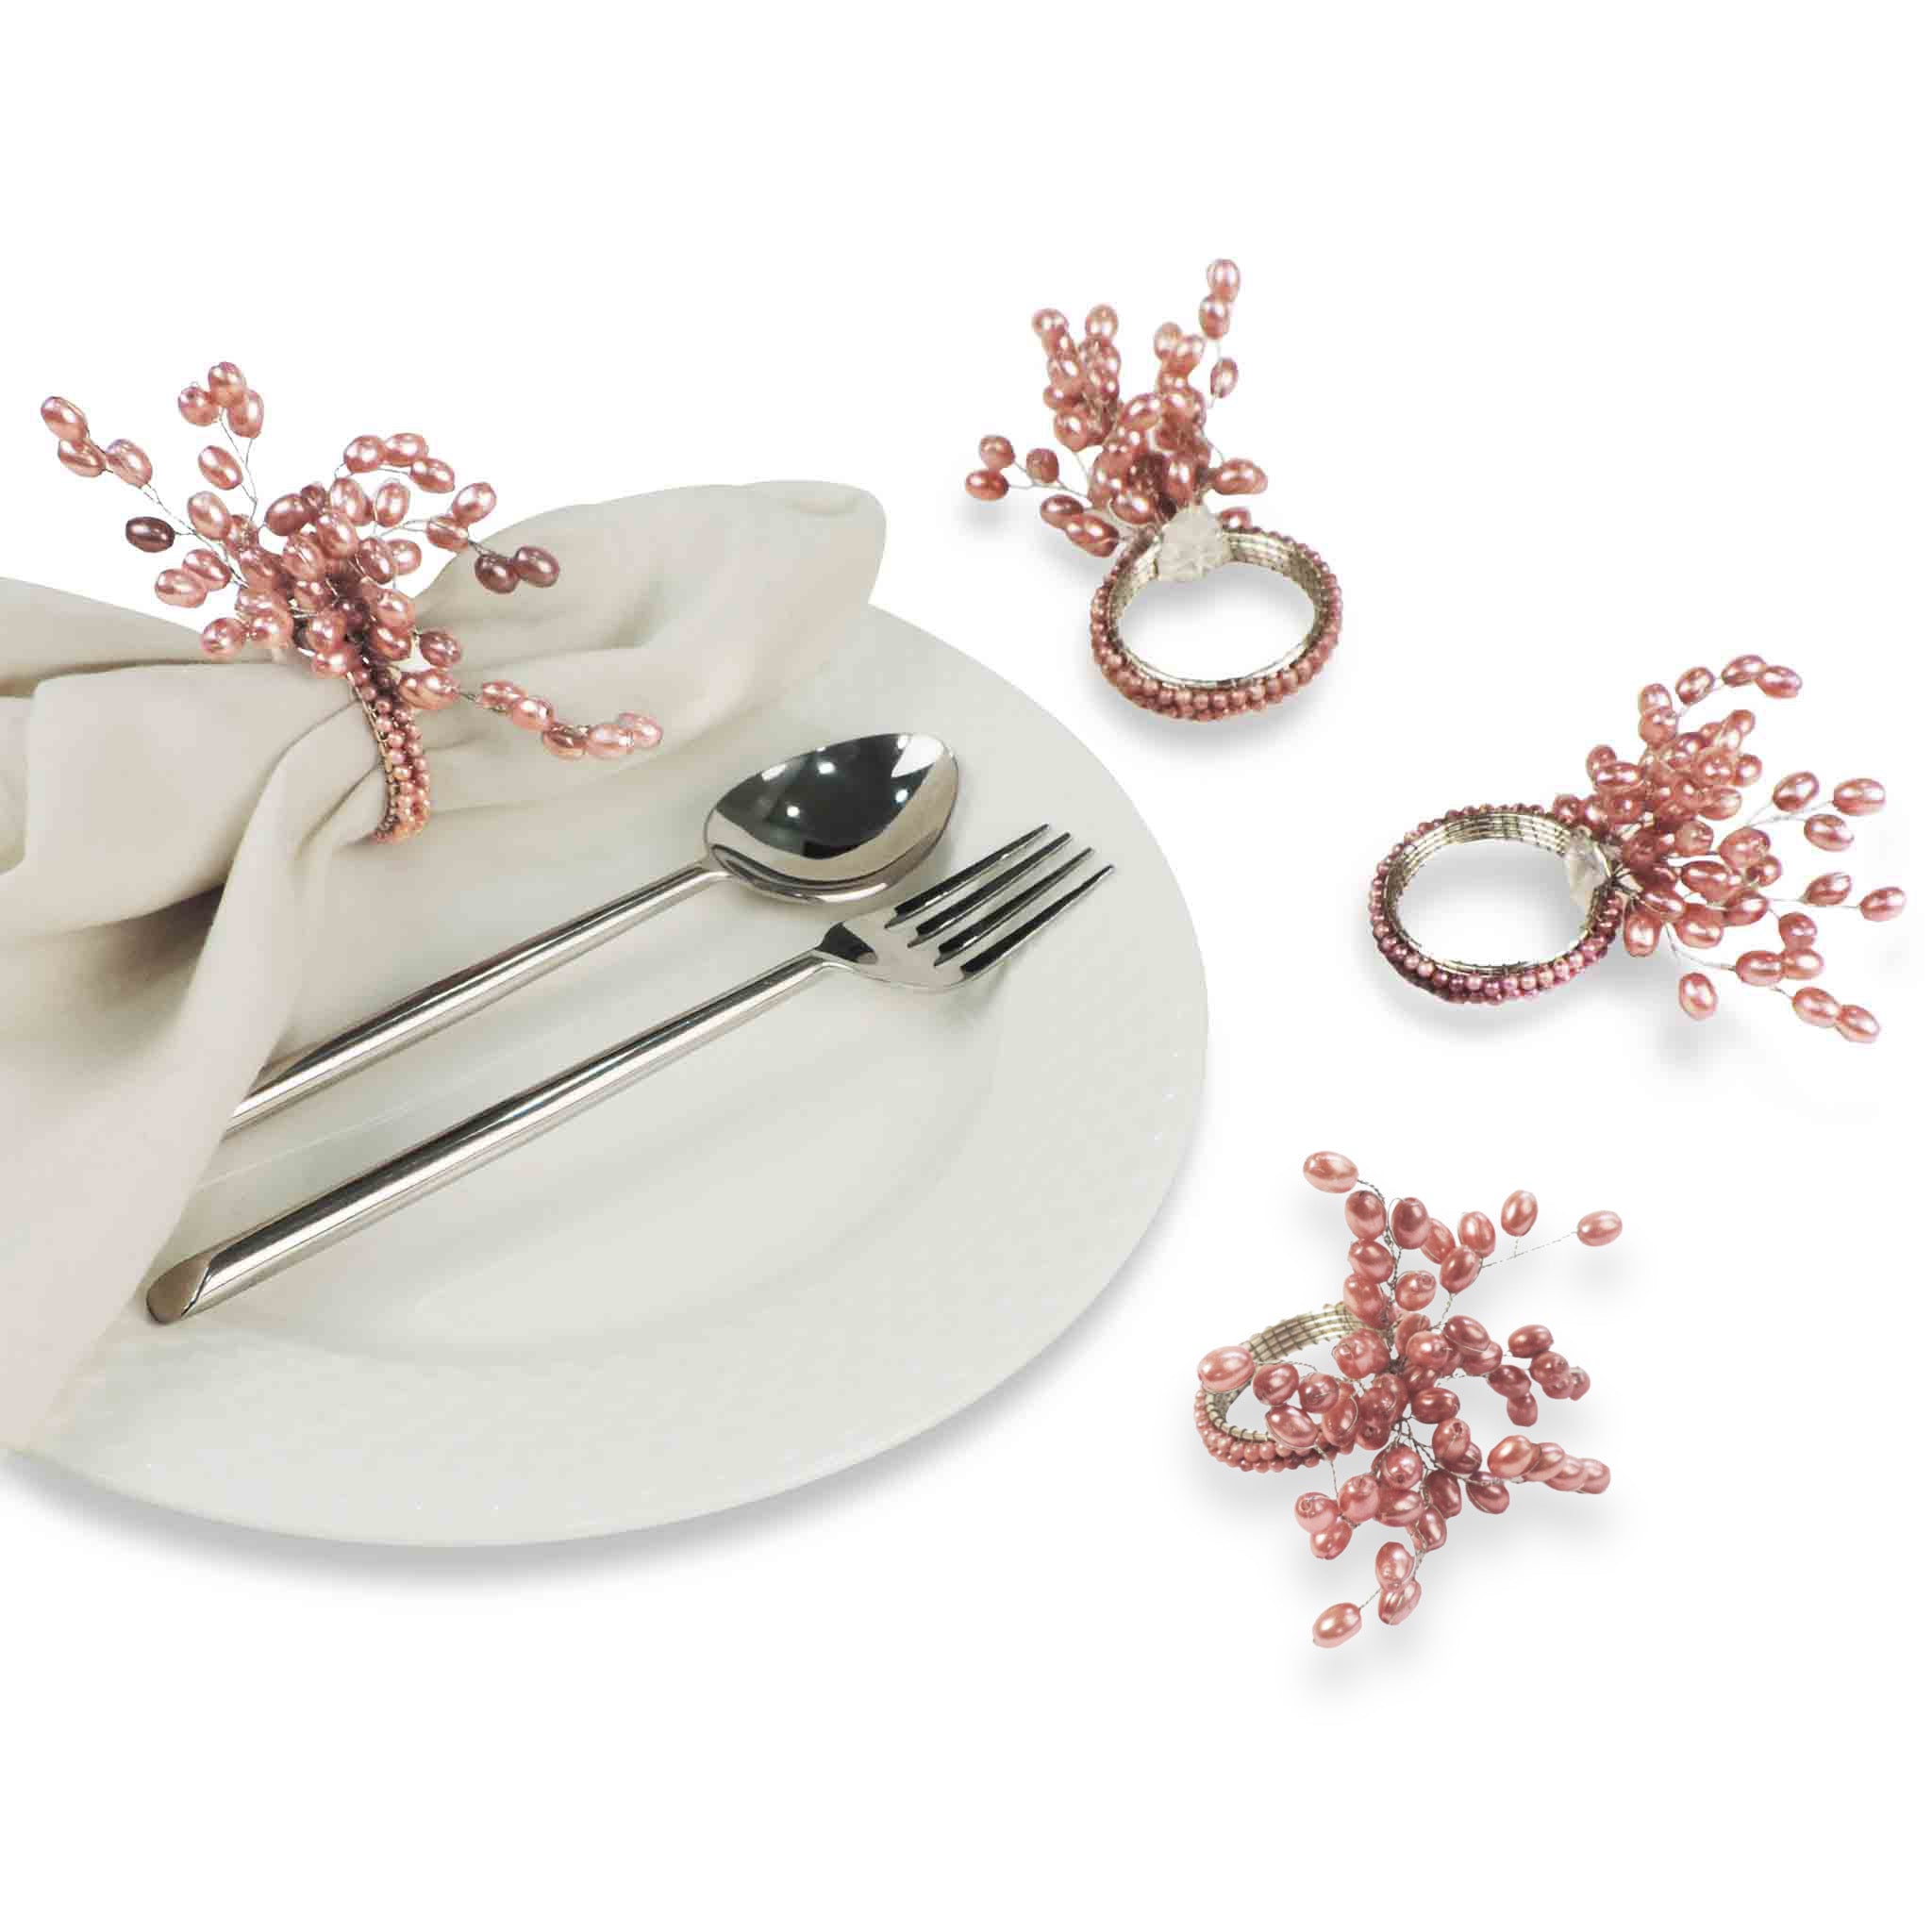 Petal Impressions Bead Table Setting for 4 - Embroidered Placemats, Coasters & Napkin Rings in Dusty Pink